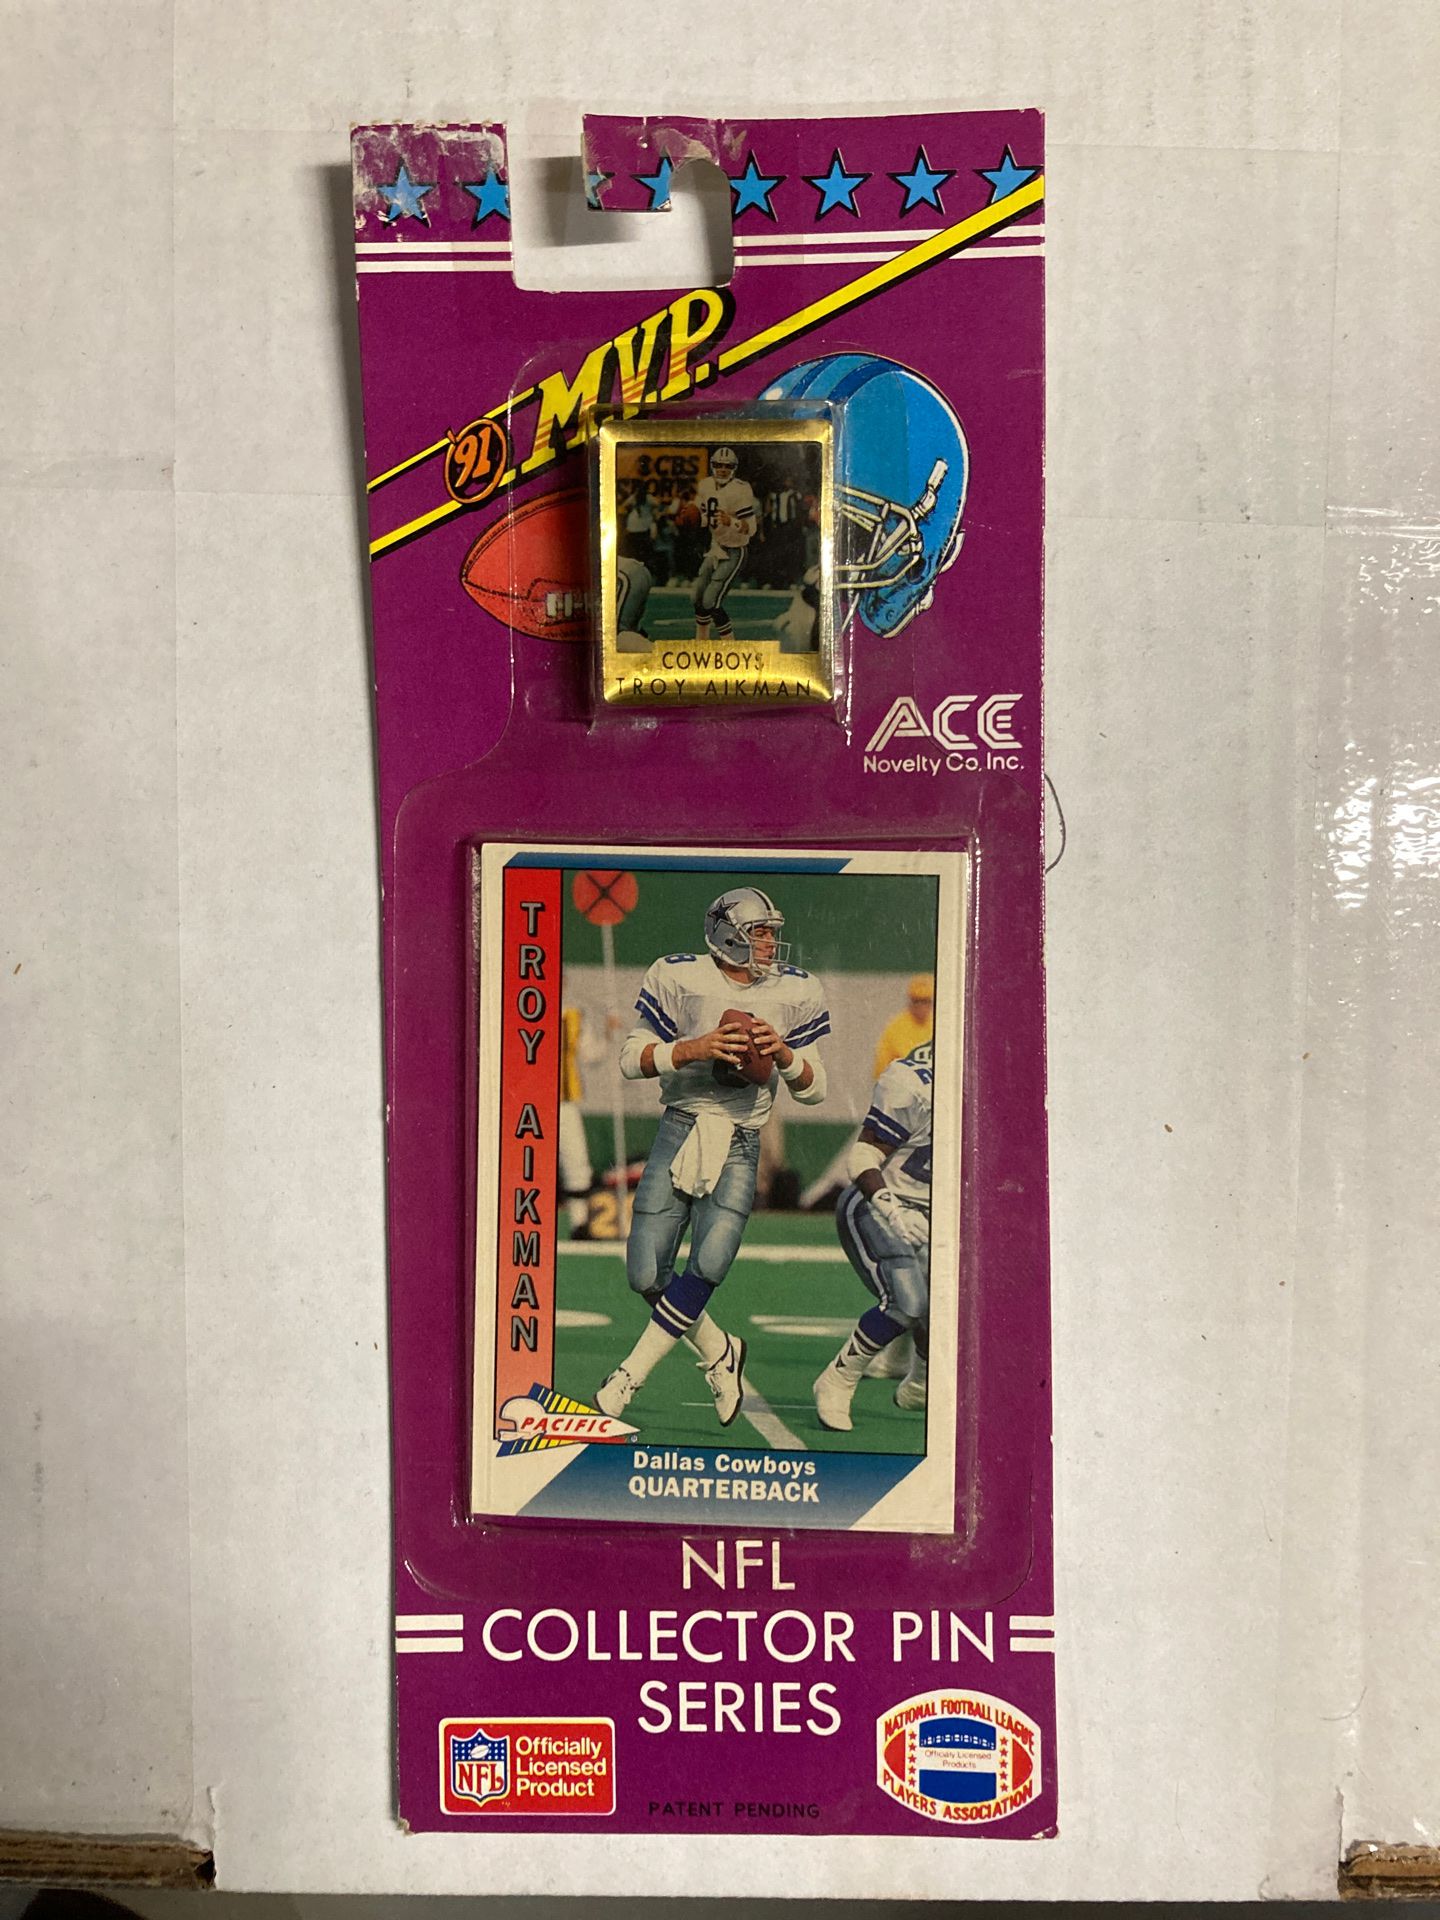 Troy Aikman 1991 collector